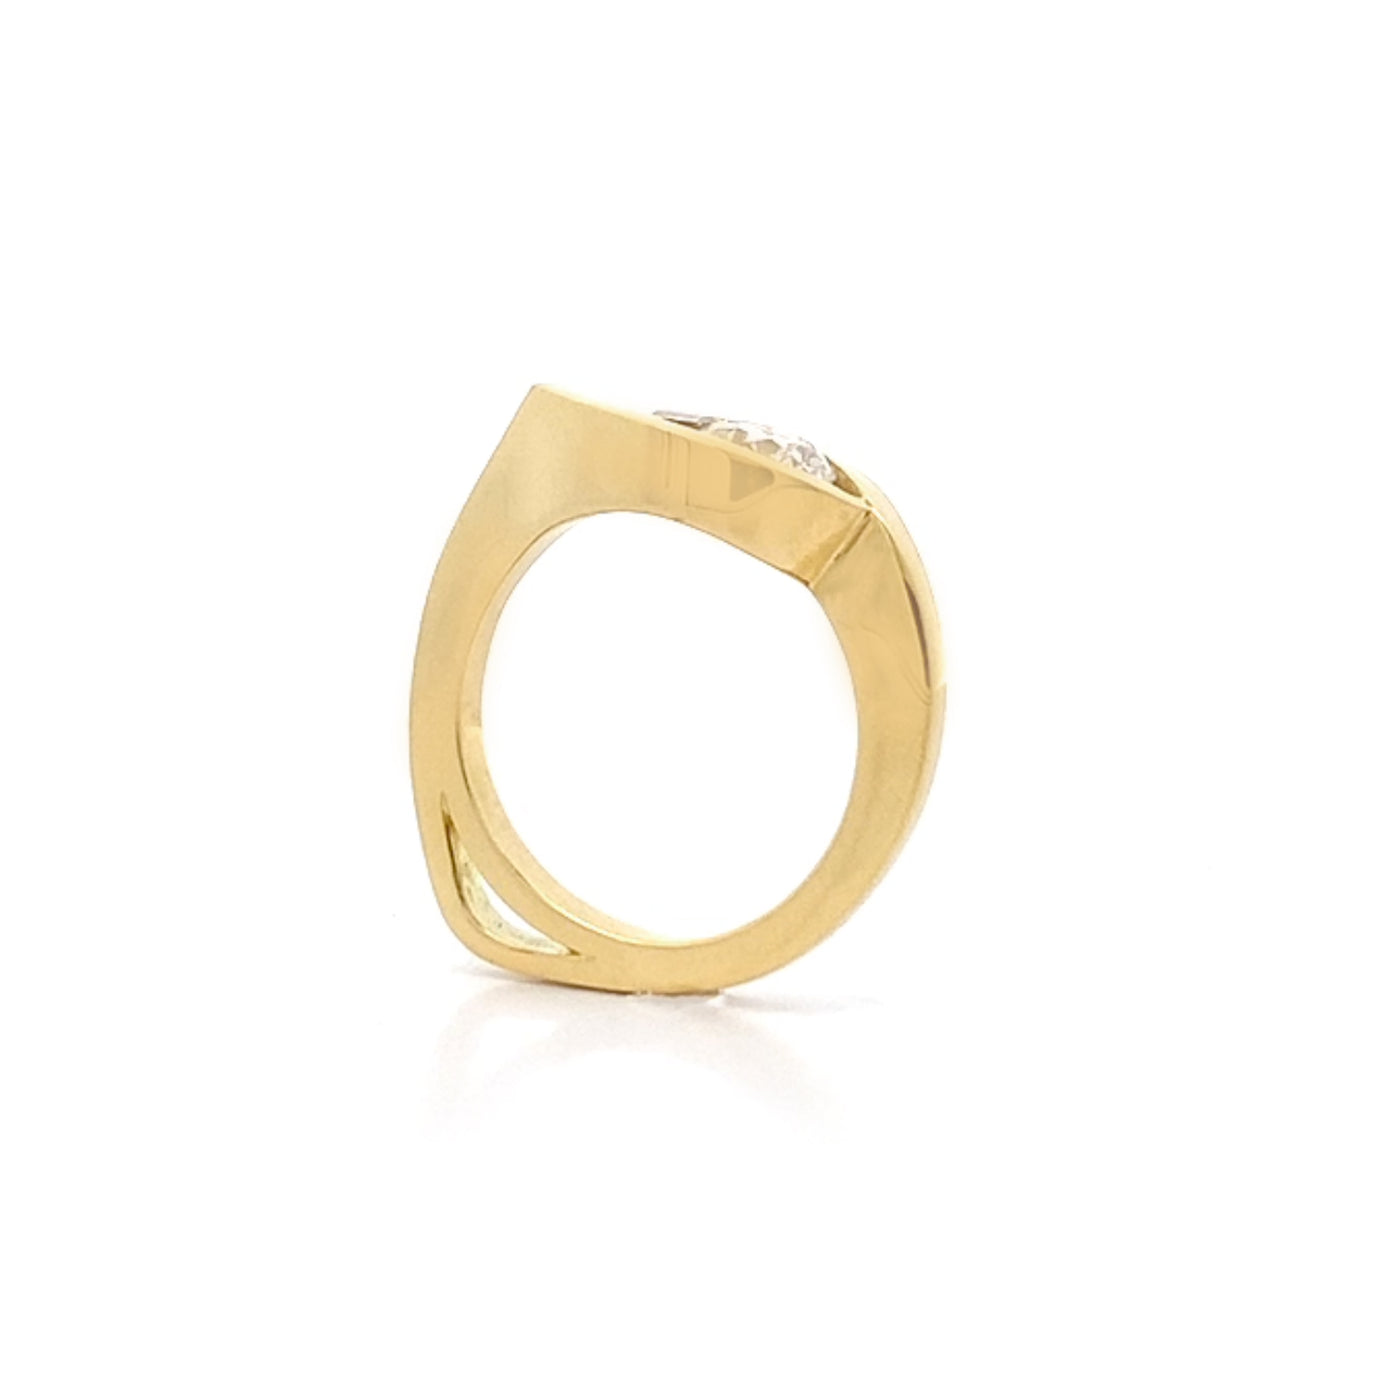 I Ain't Heartless: Brilliant Cut Diamond Solitaire Ring in Yellow Gold